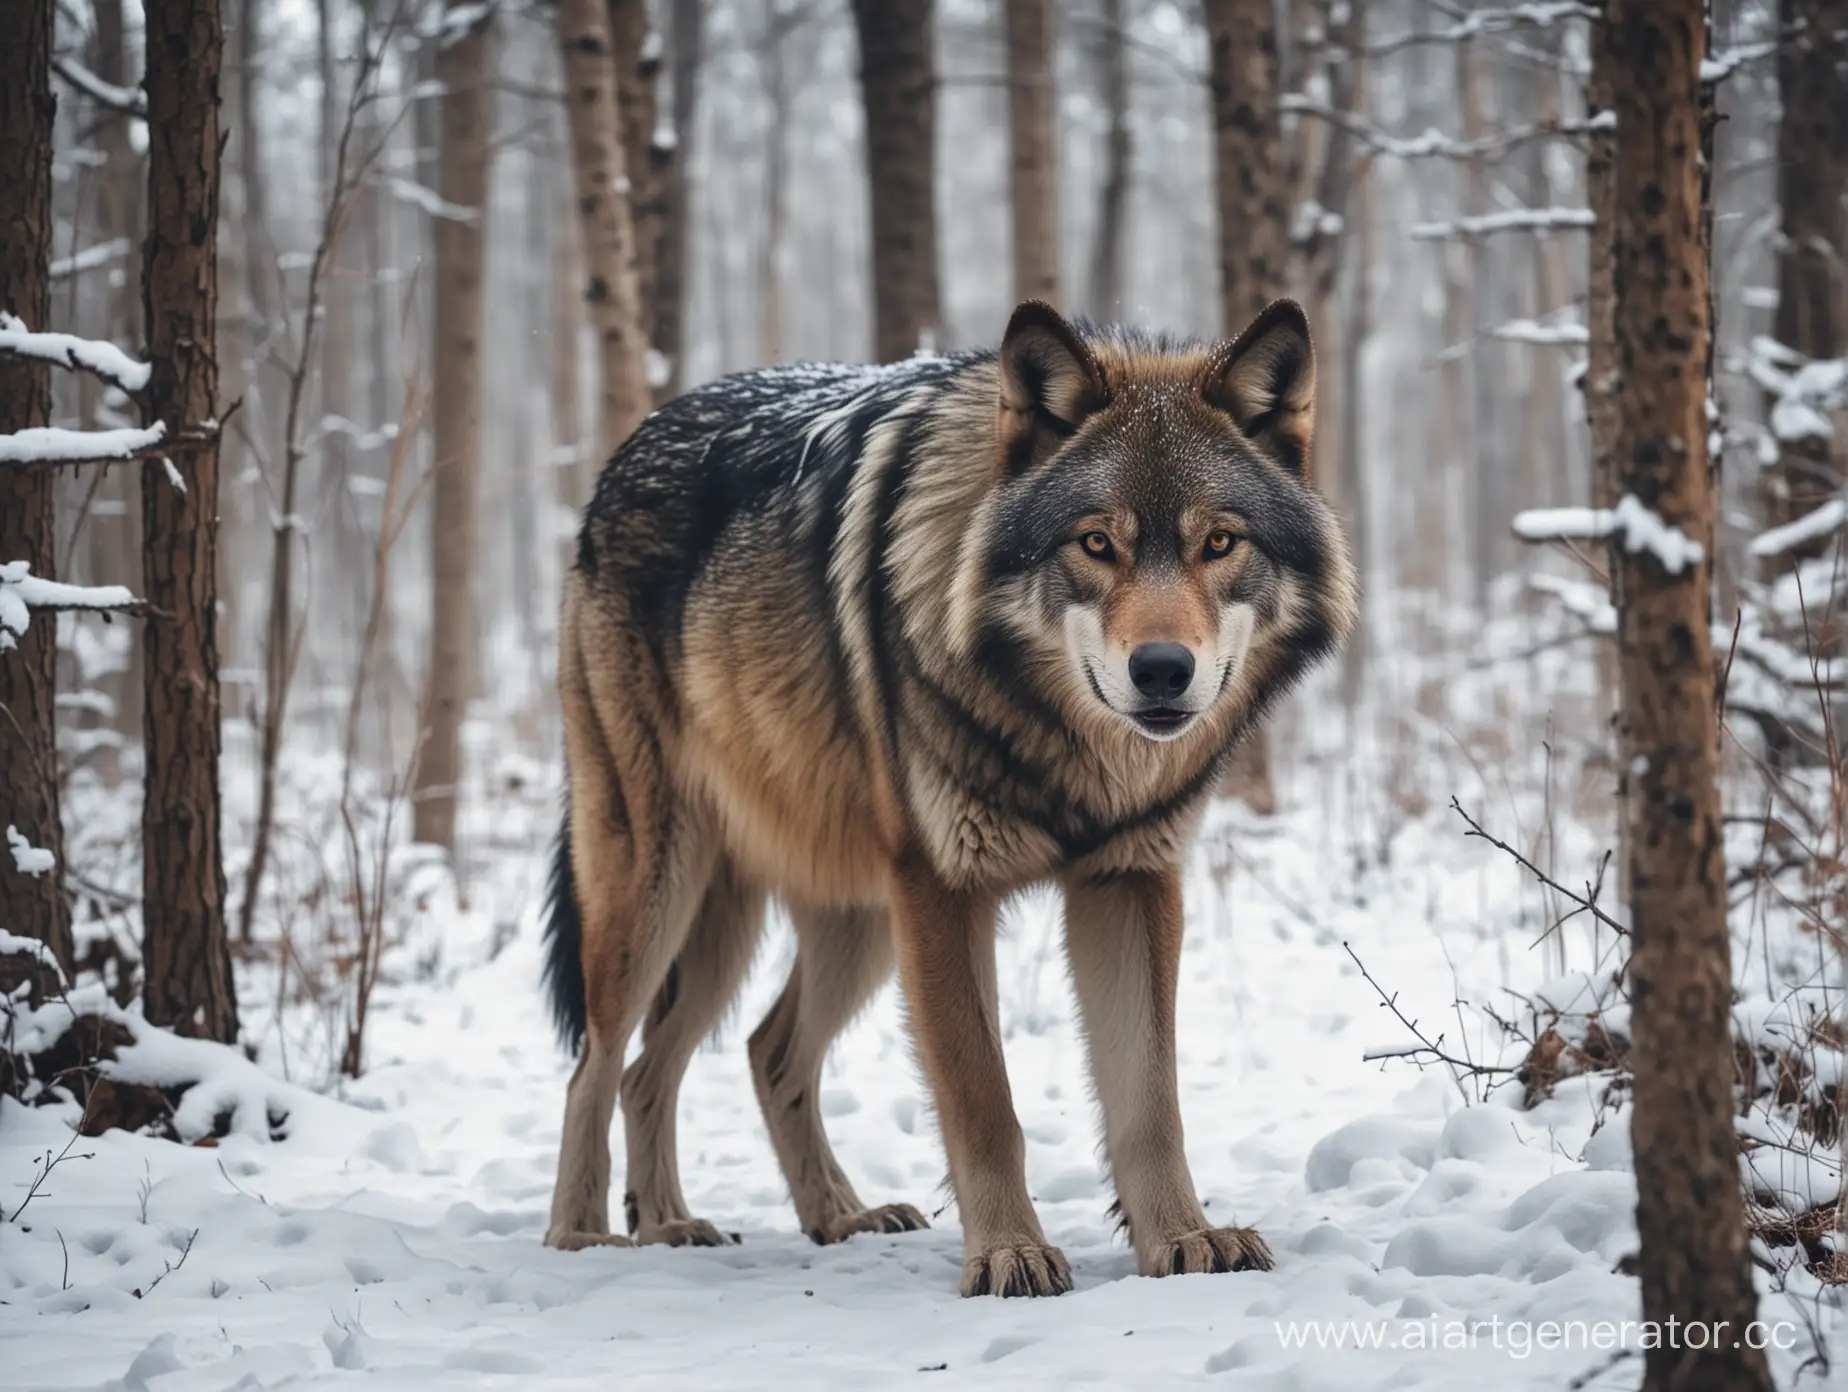 Mysterious-Encounter-Big-Bad-Wolf-in-Snowy-Forest